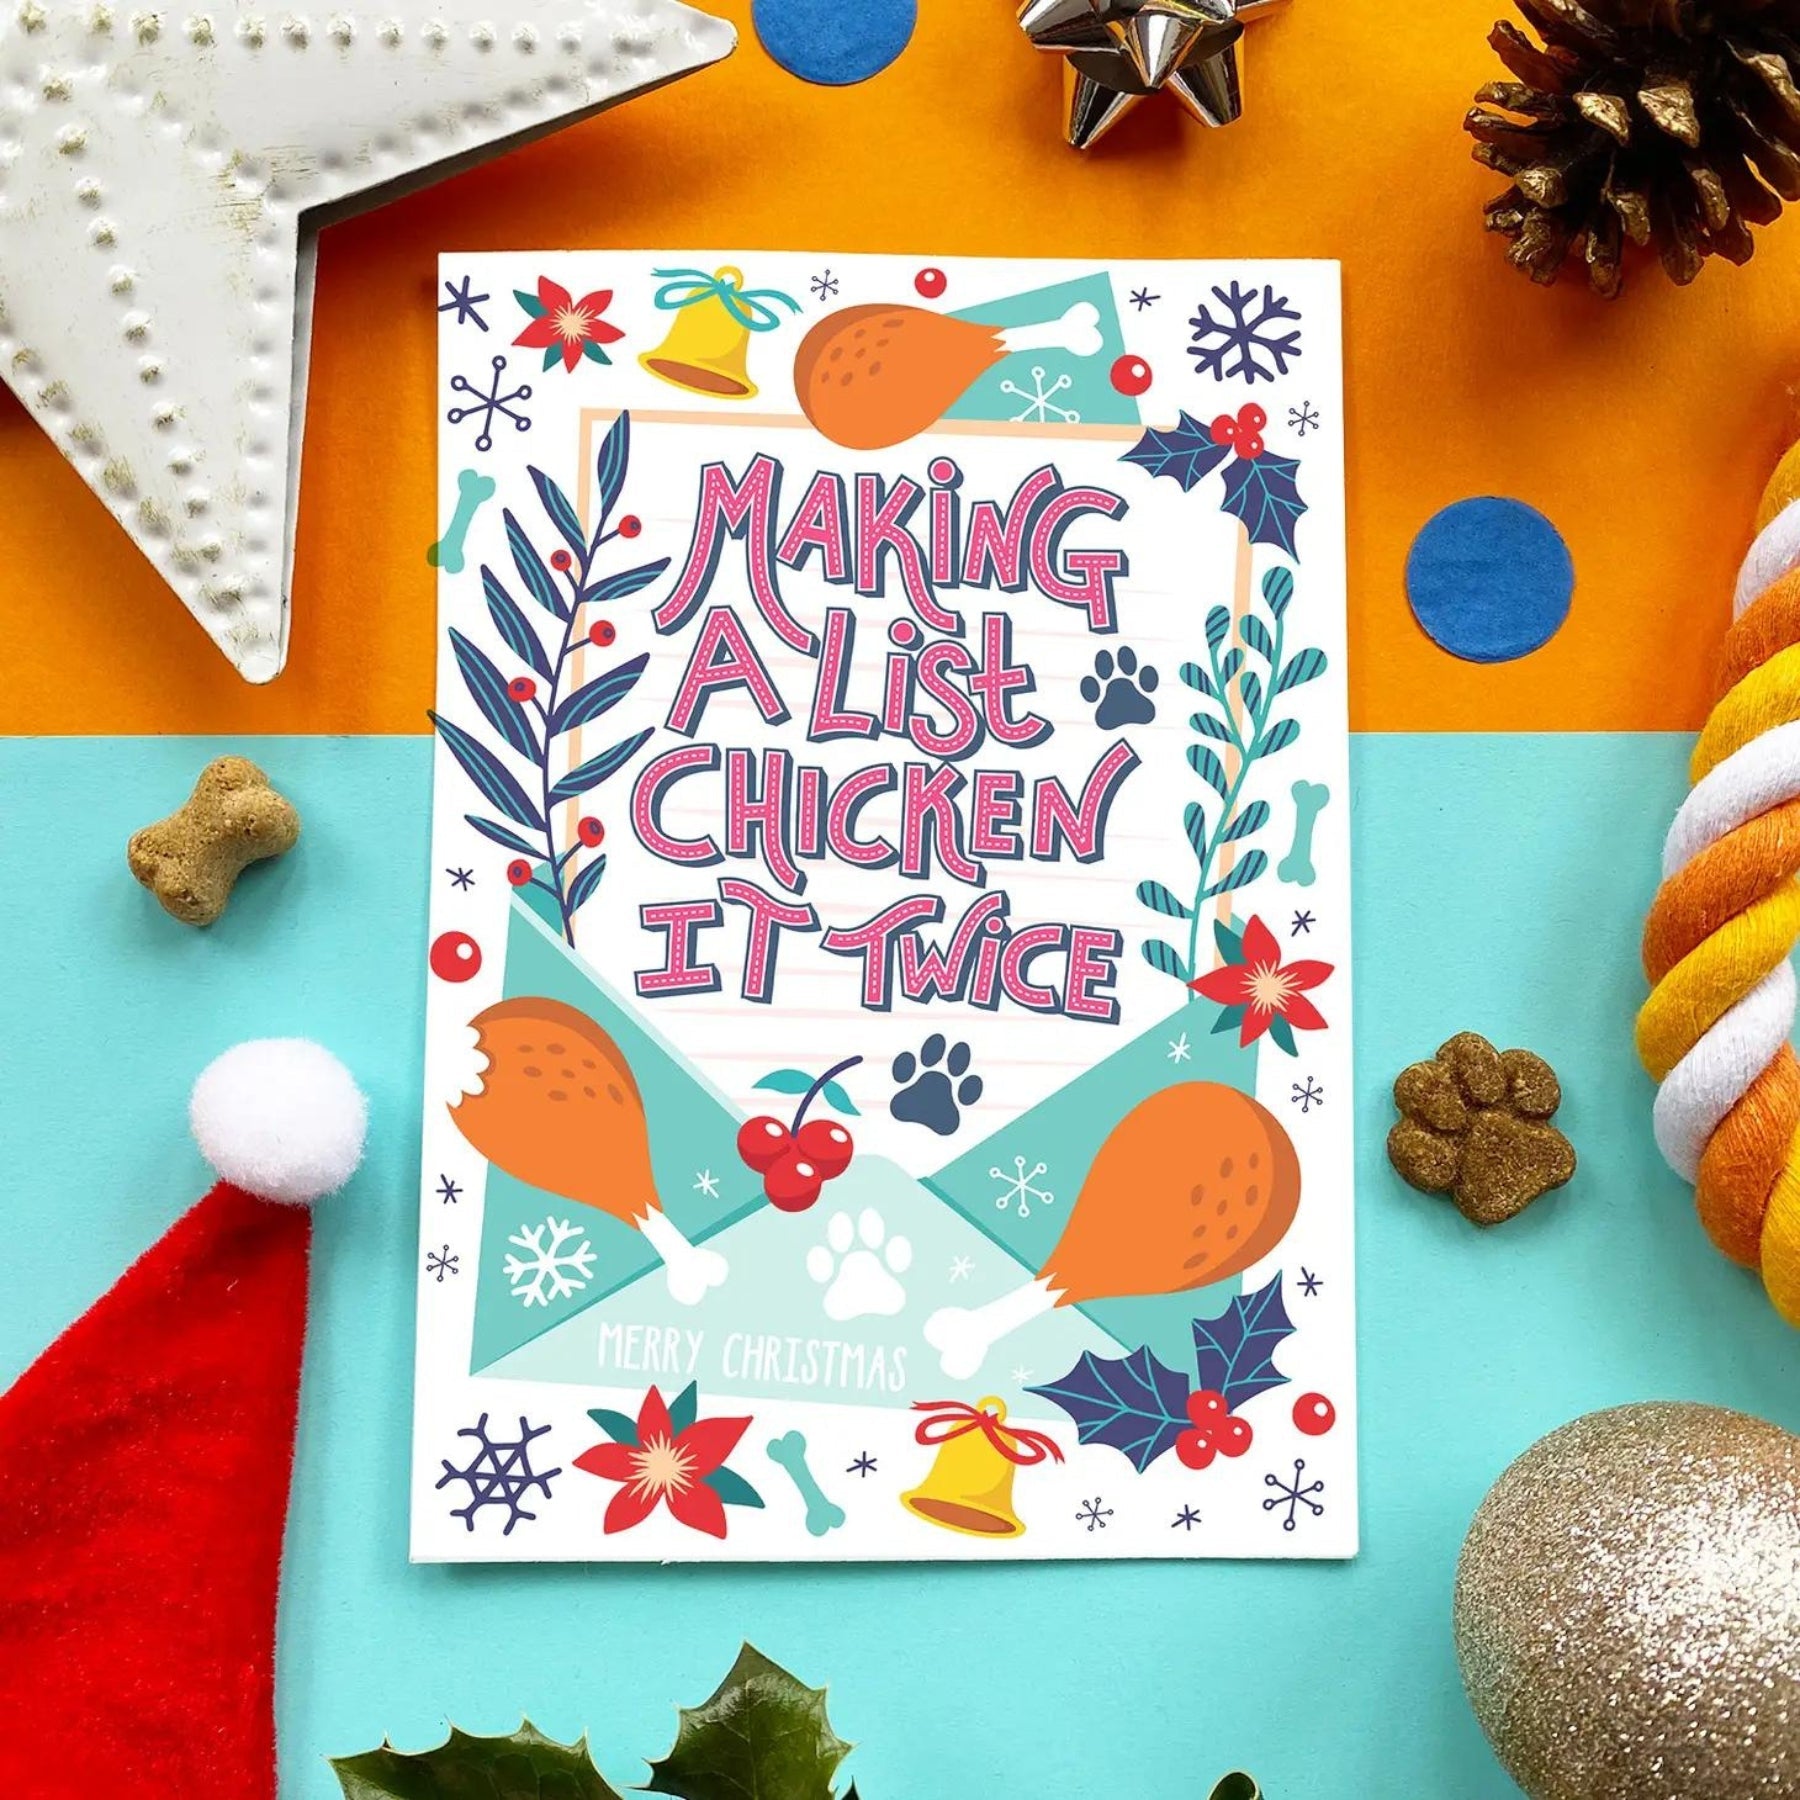 Edible Card For Dogs - Making A List Chicken It Twice - Pooch Luxury